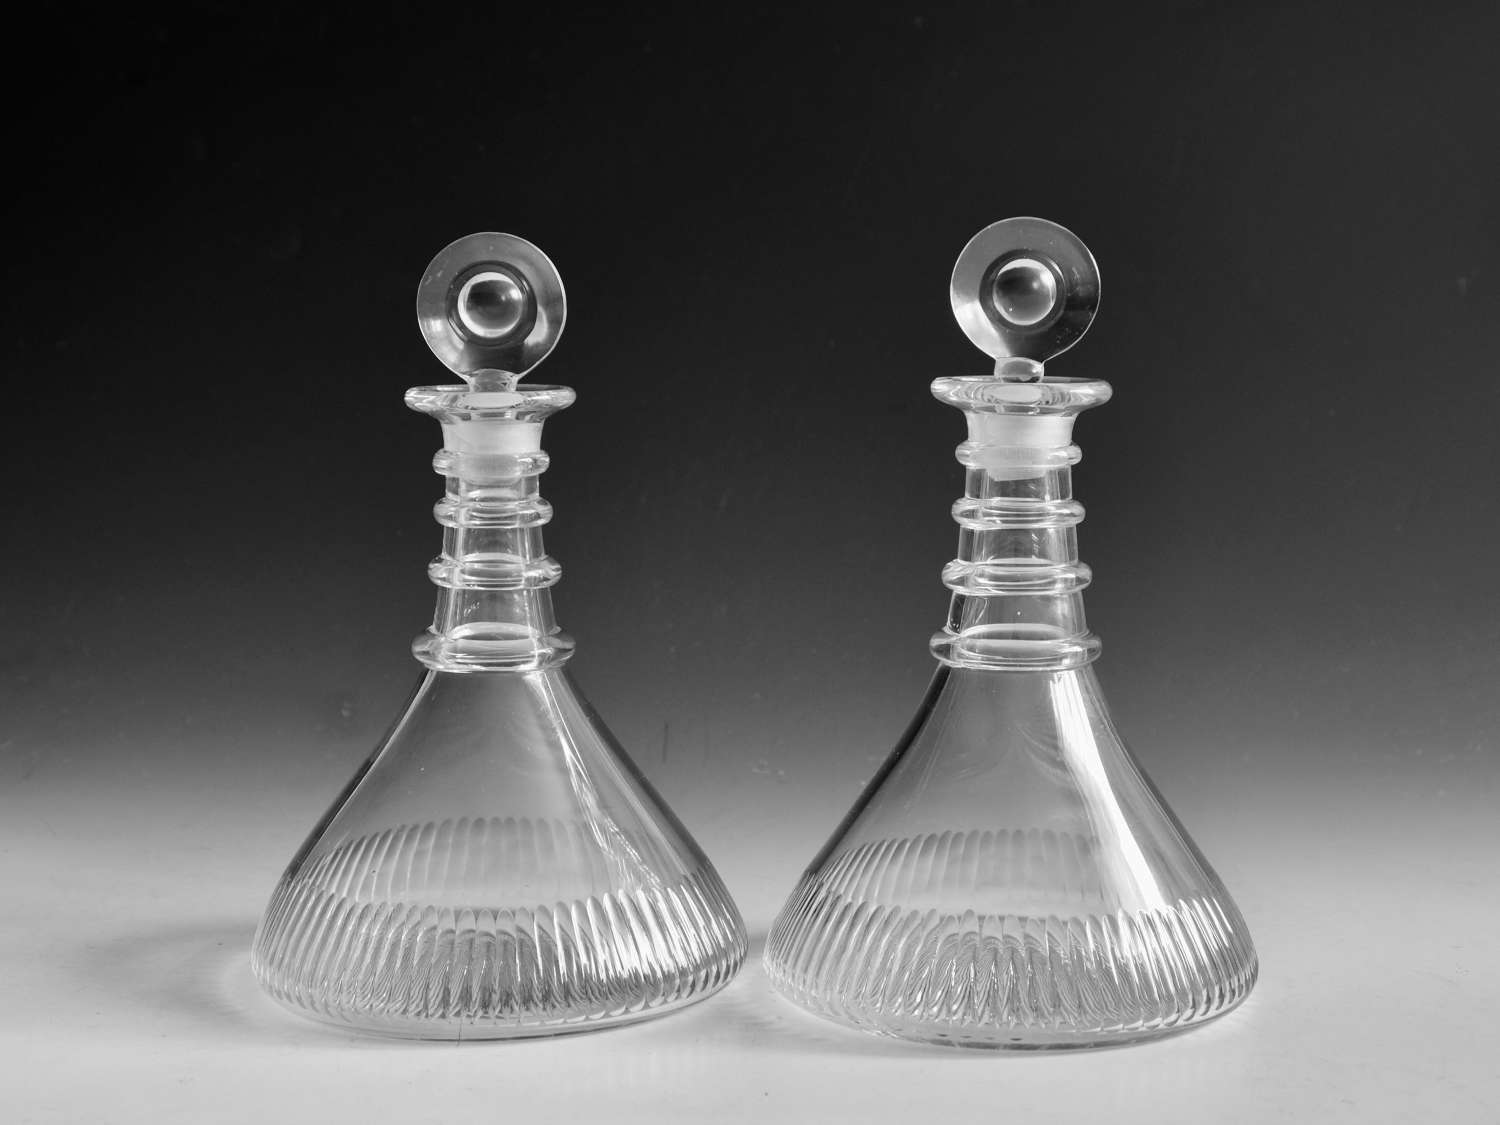 Antique glass ship's decanters pair English c1830